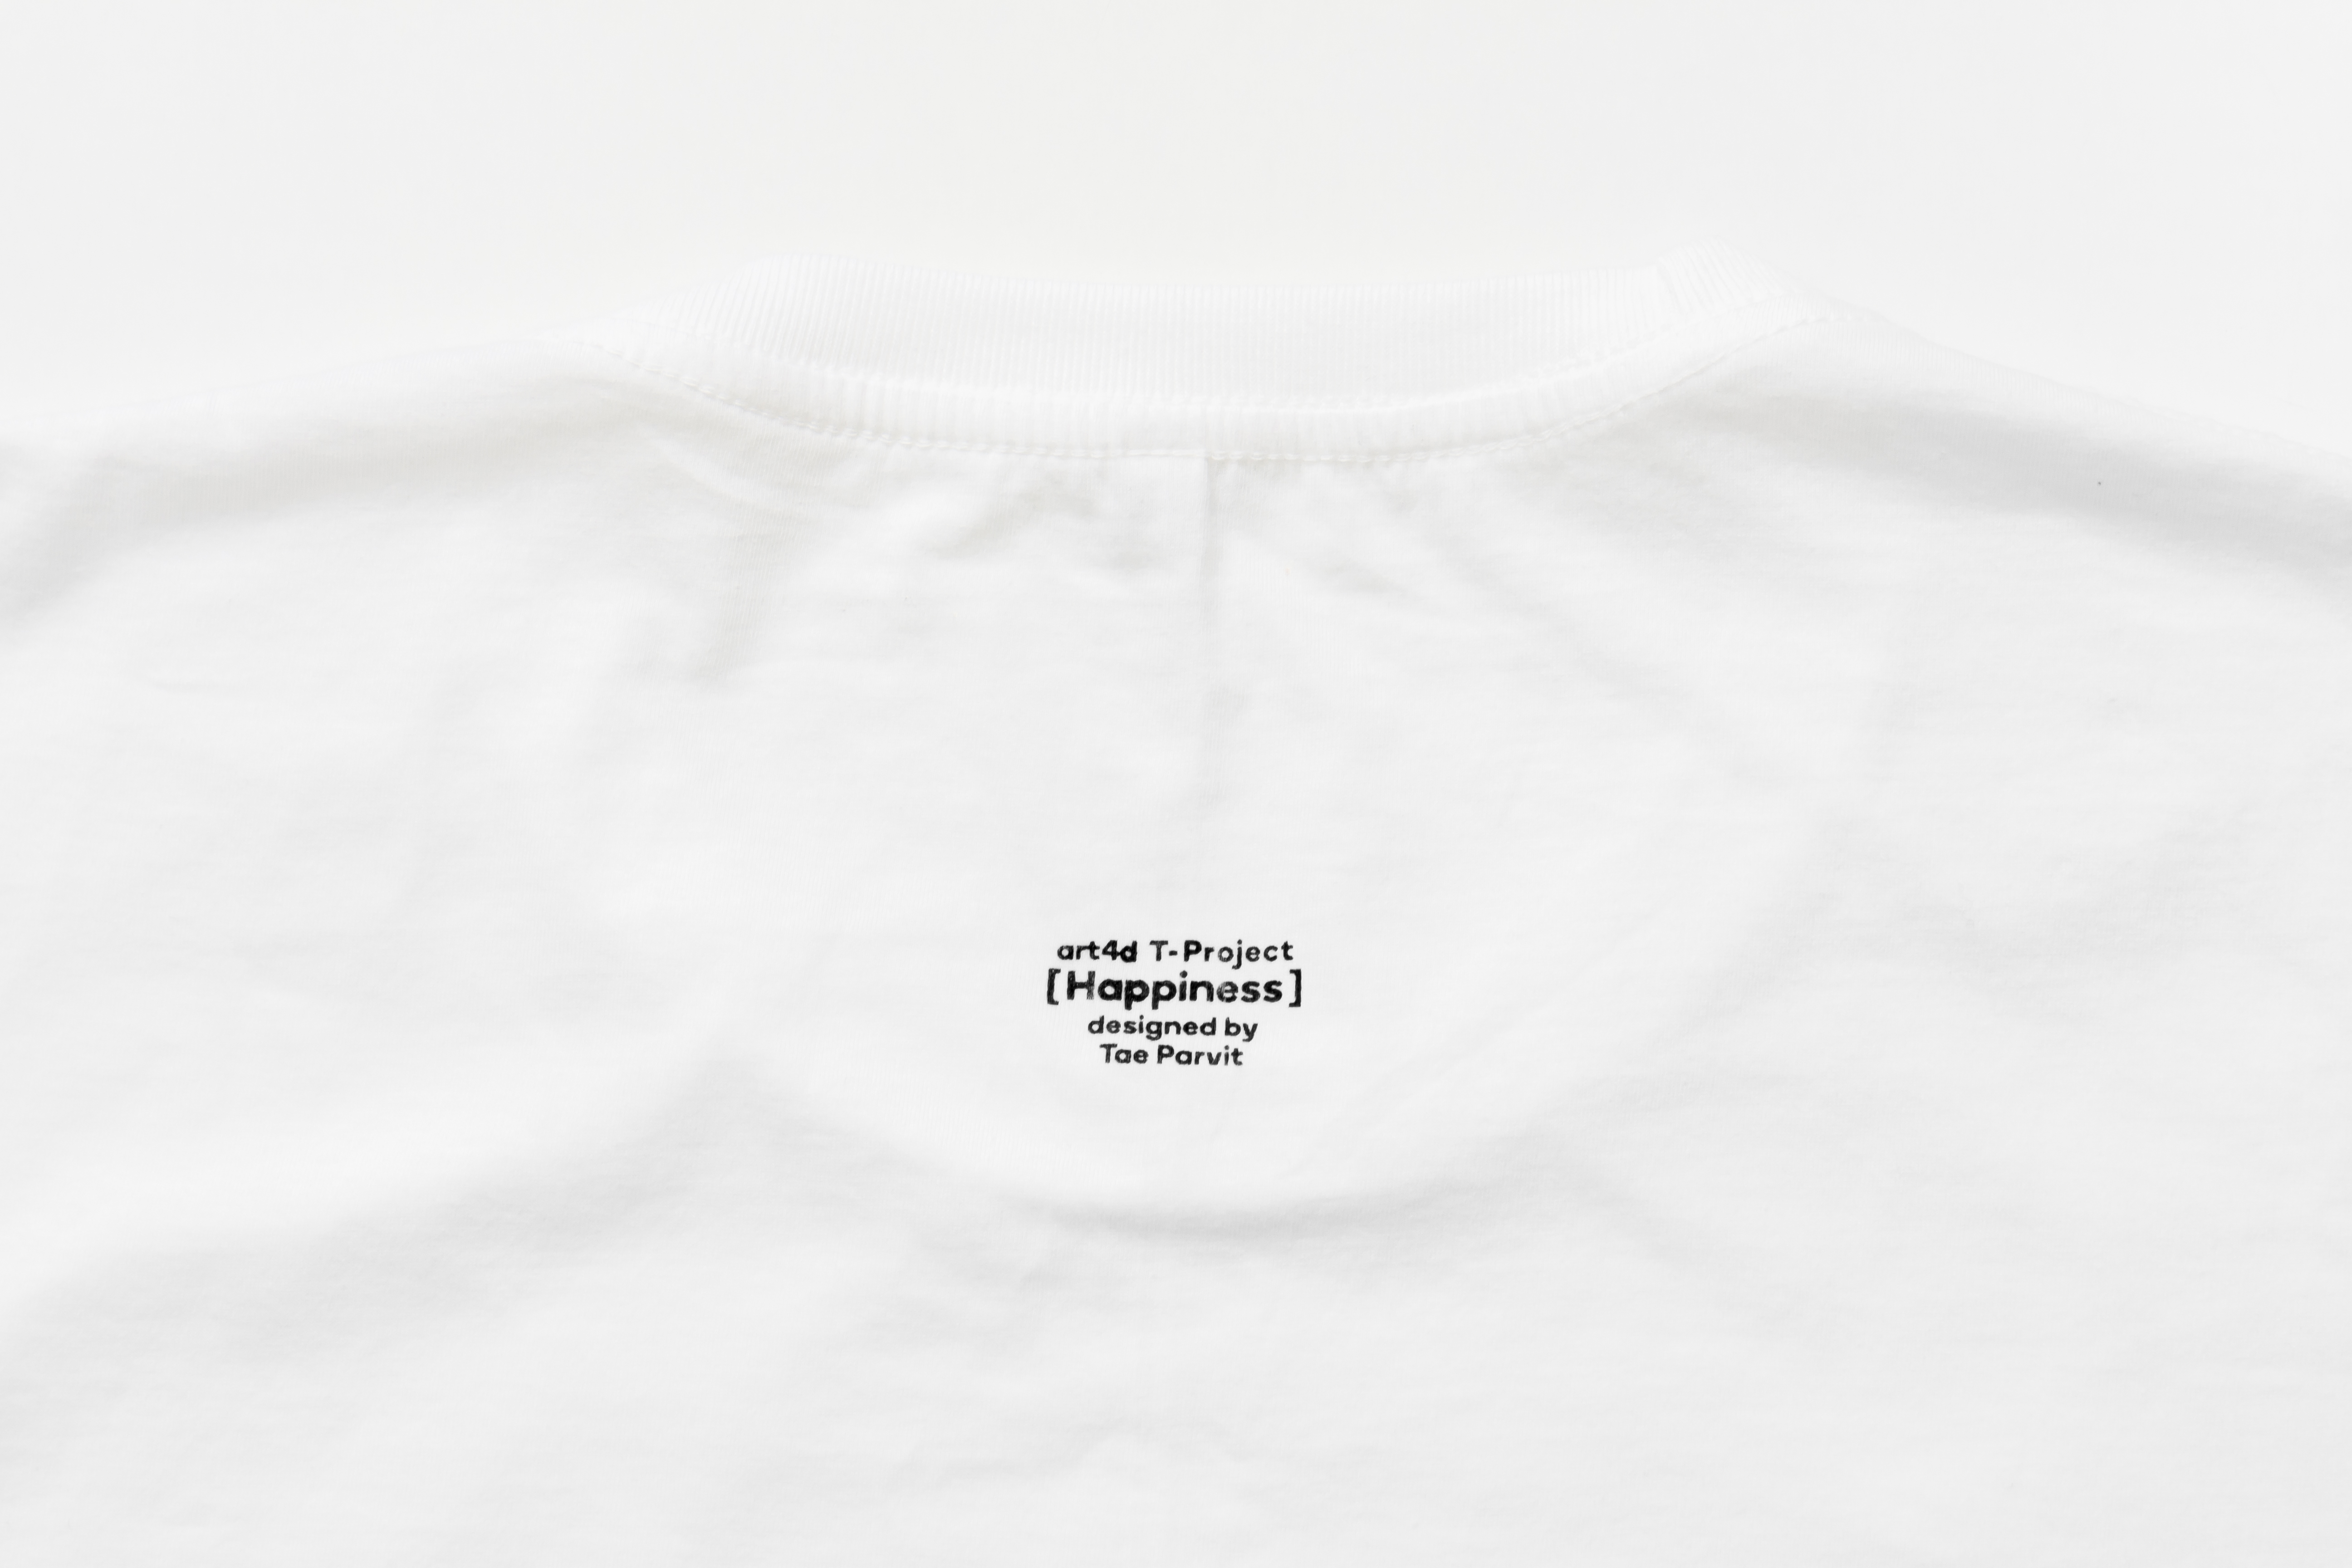 'HAPPINESS' T BY TAE PARVIT - art4d